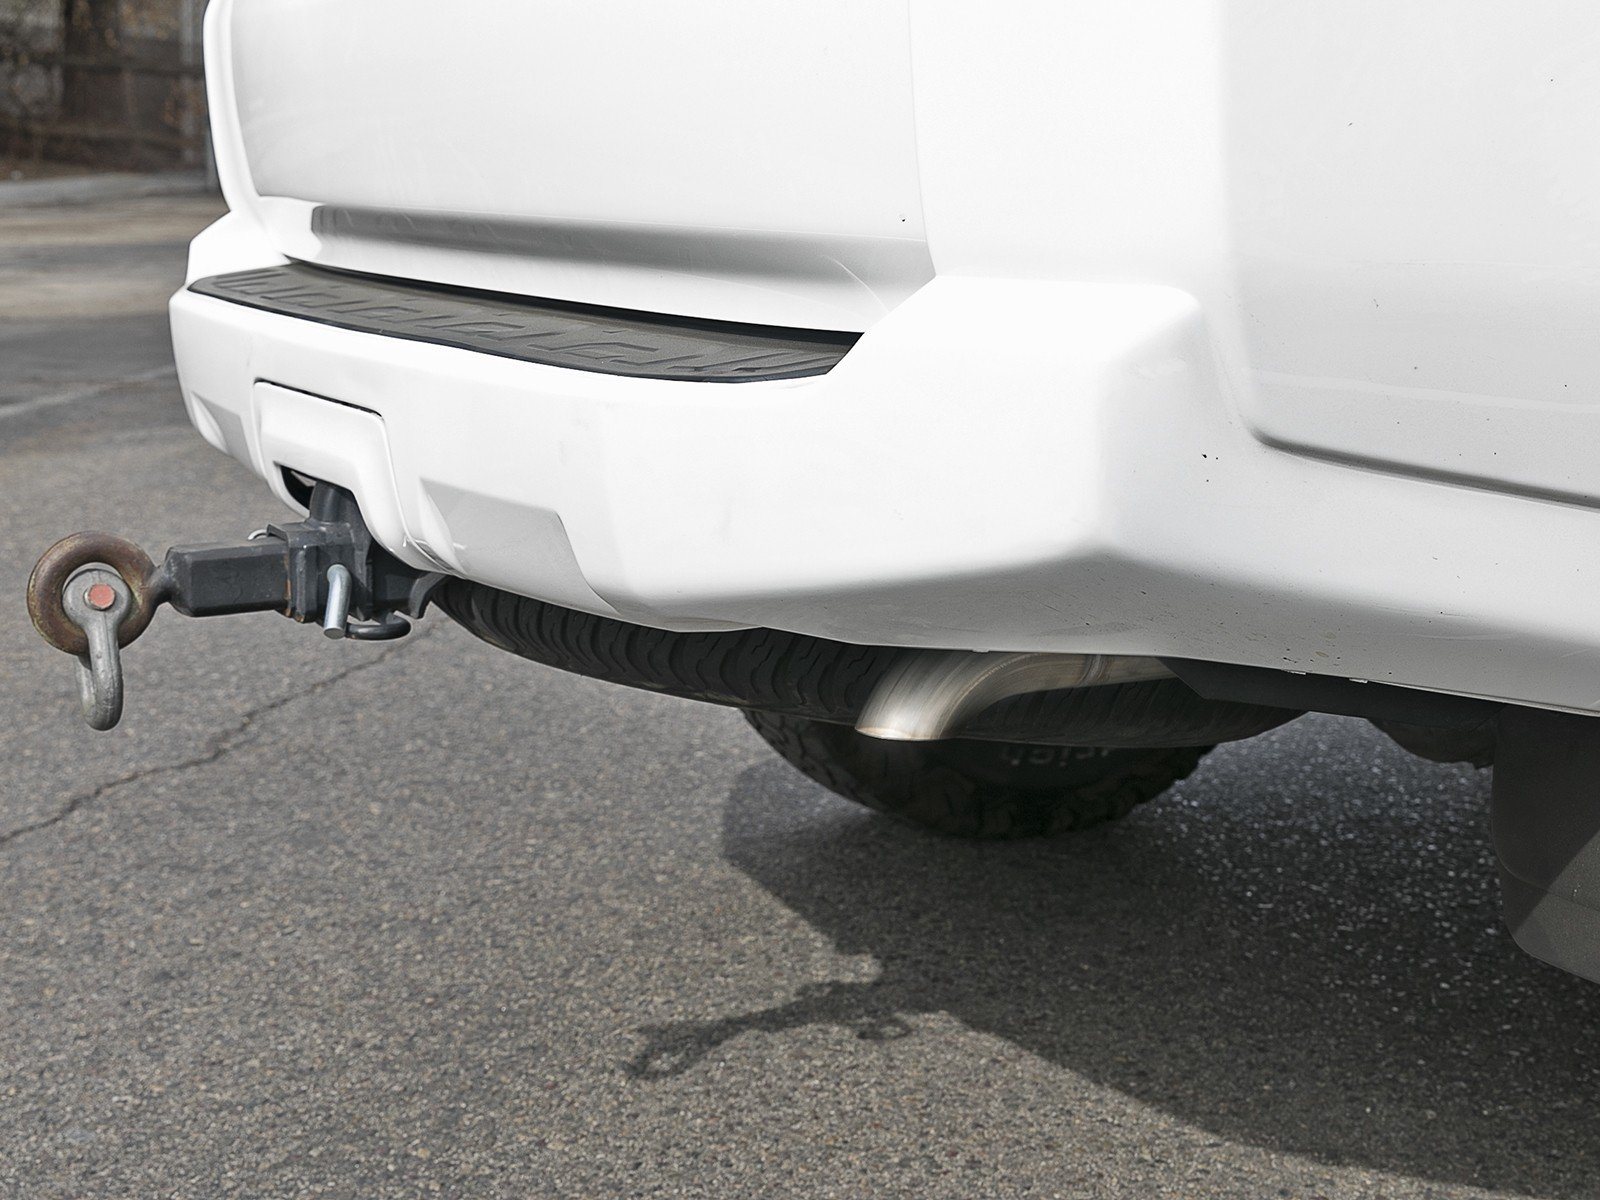 '10-23 Toyota 4Runner MACH Force XP Hi-Tuck 2-1/2" 409 Cat-Back Exhaust Exhaust Systems AFE Power